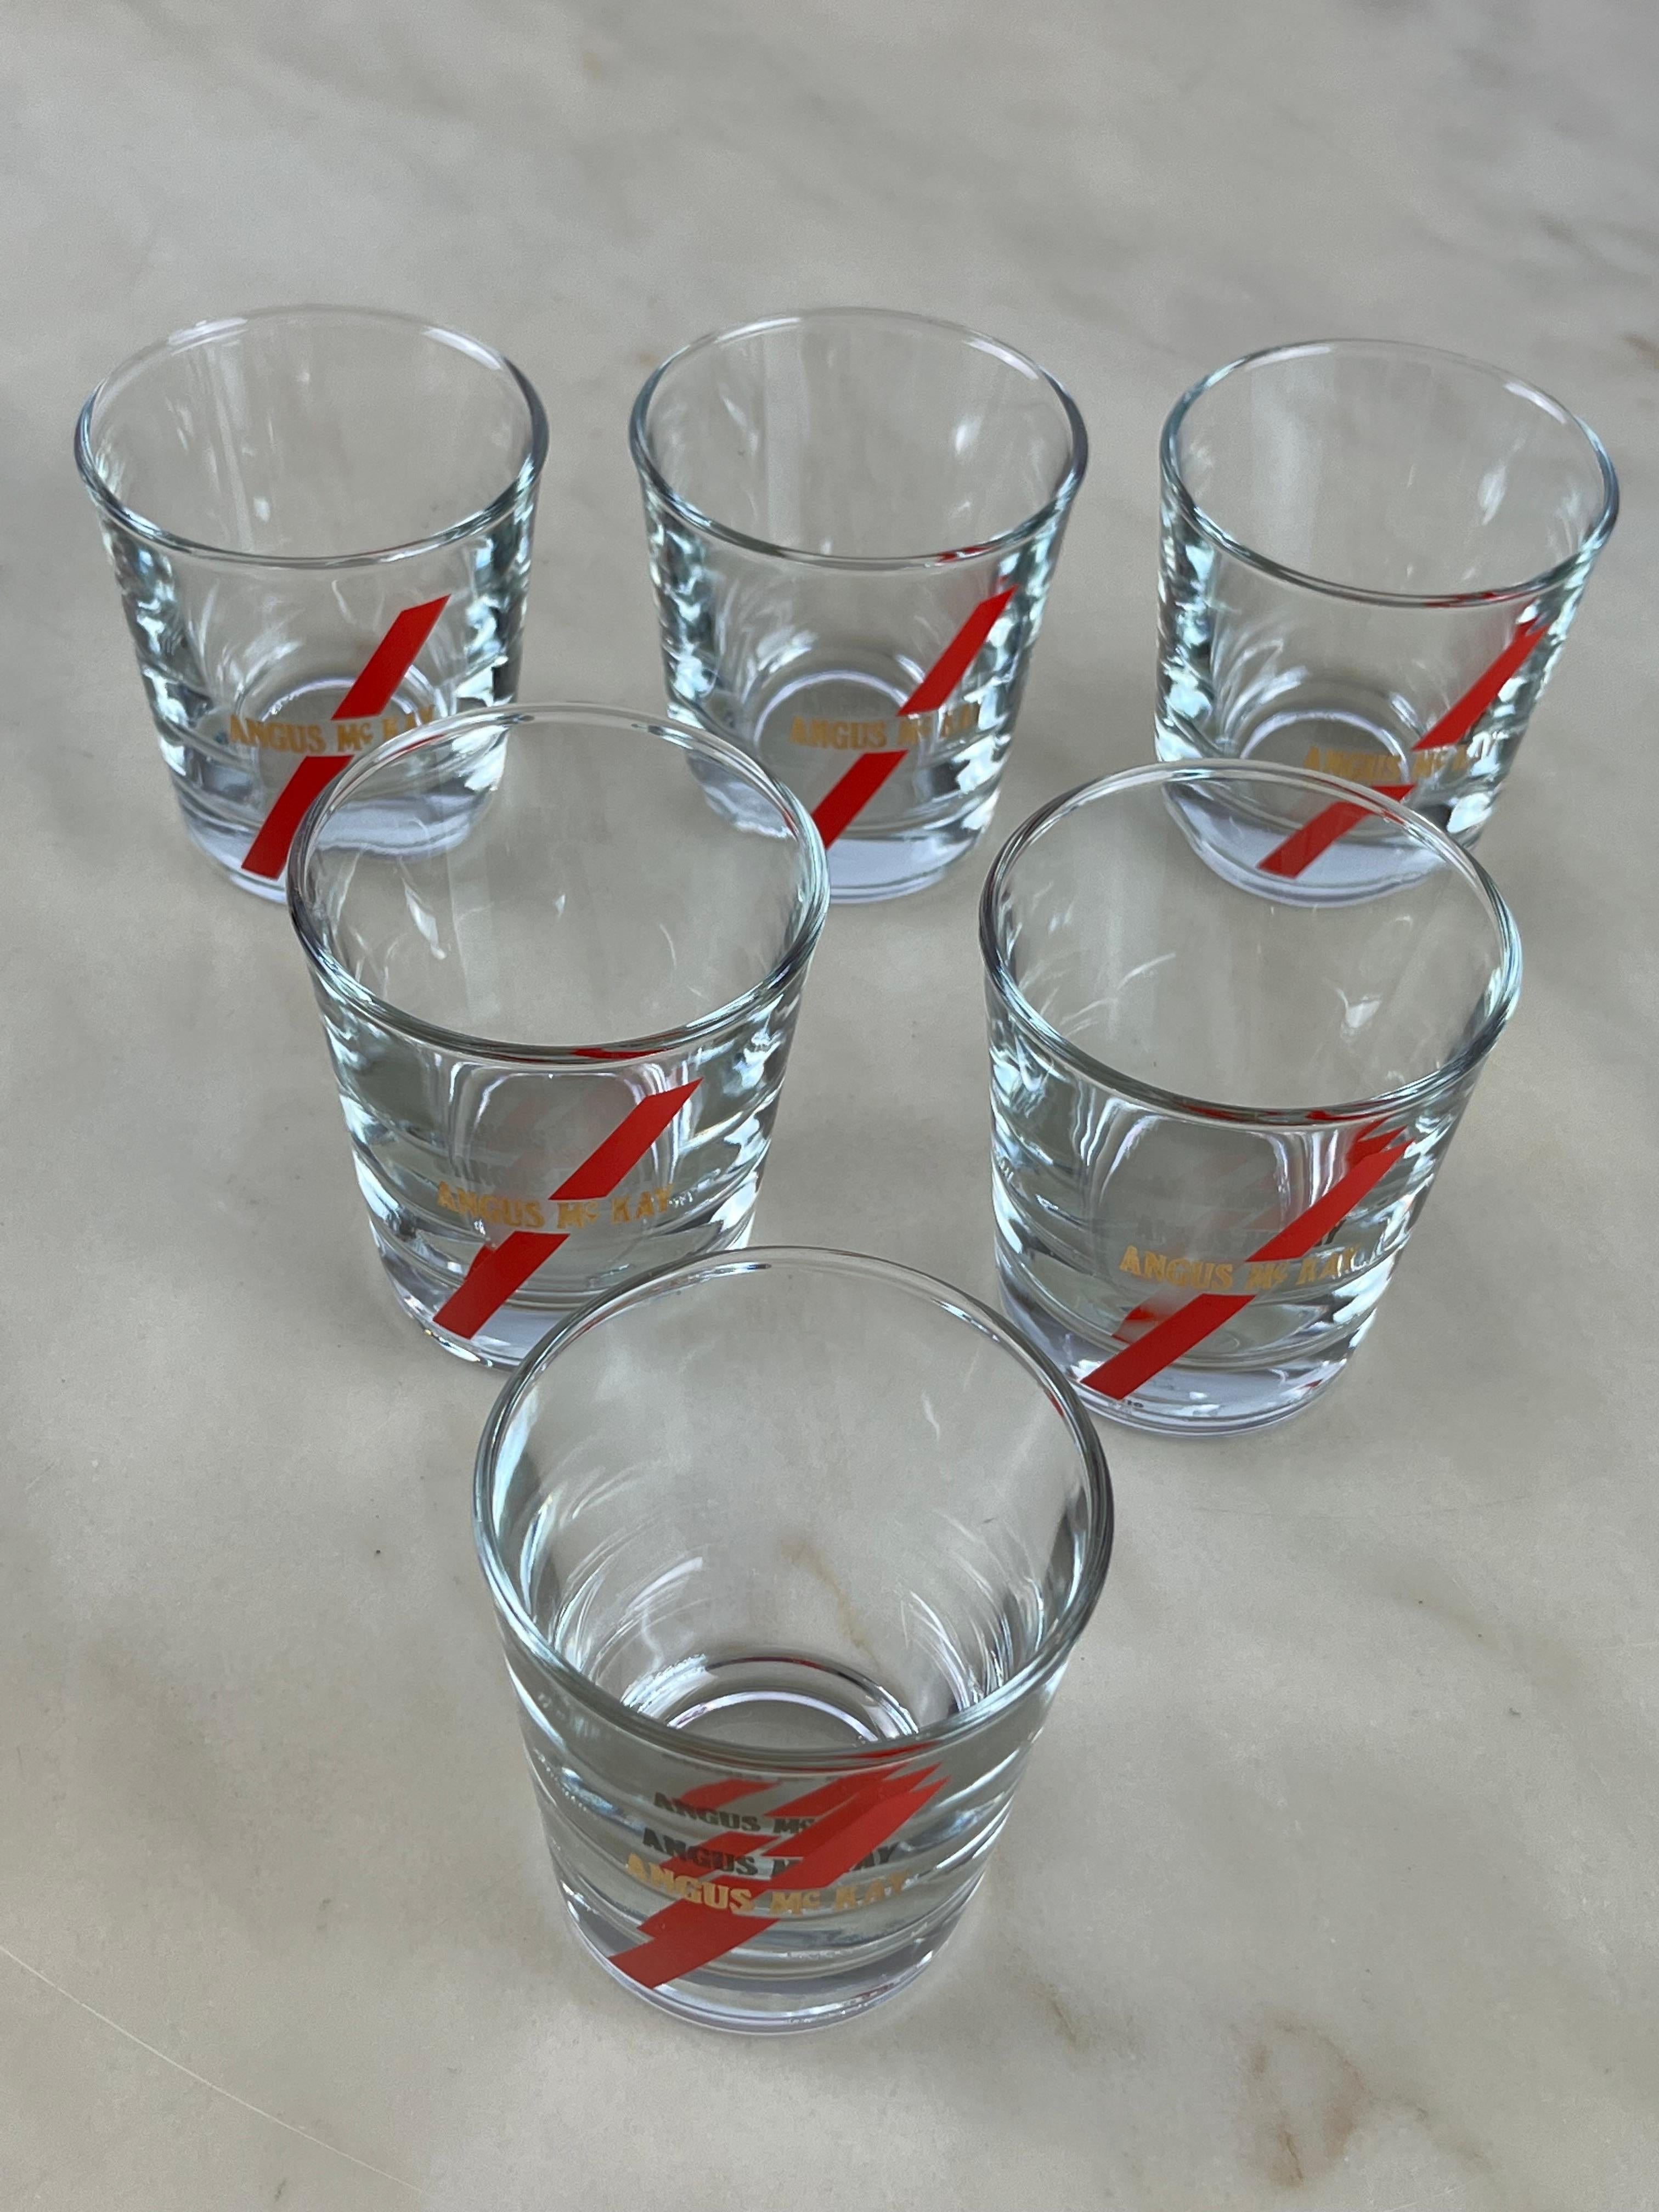 Six Vintage Whiskey Glasses, Boxed, Never Used, Augus Mc Kay, 1970 For Sale 1